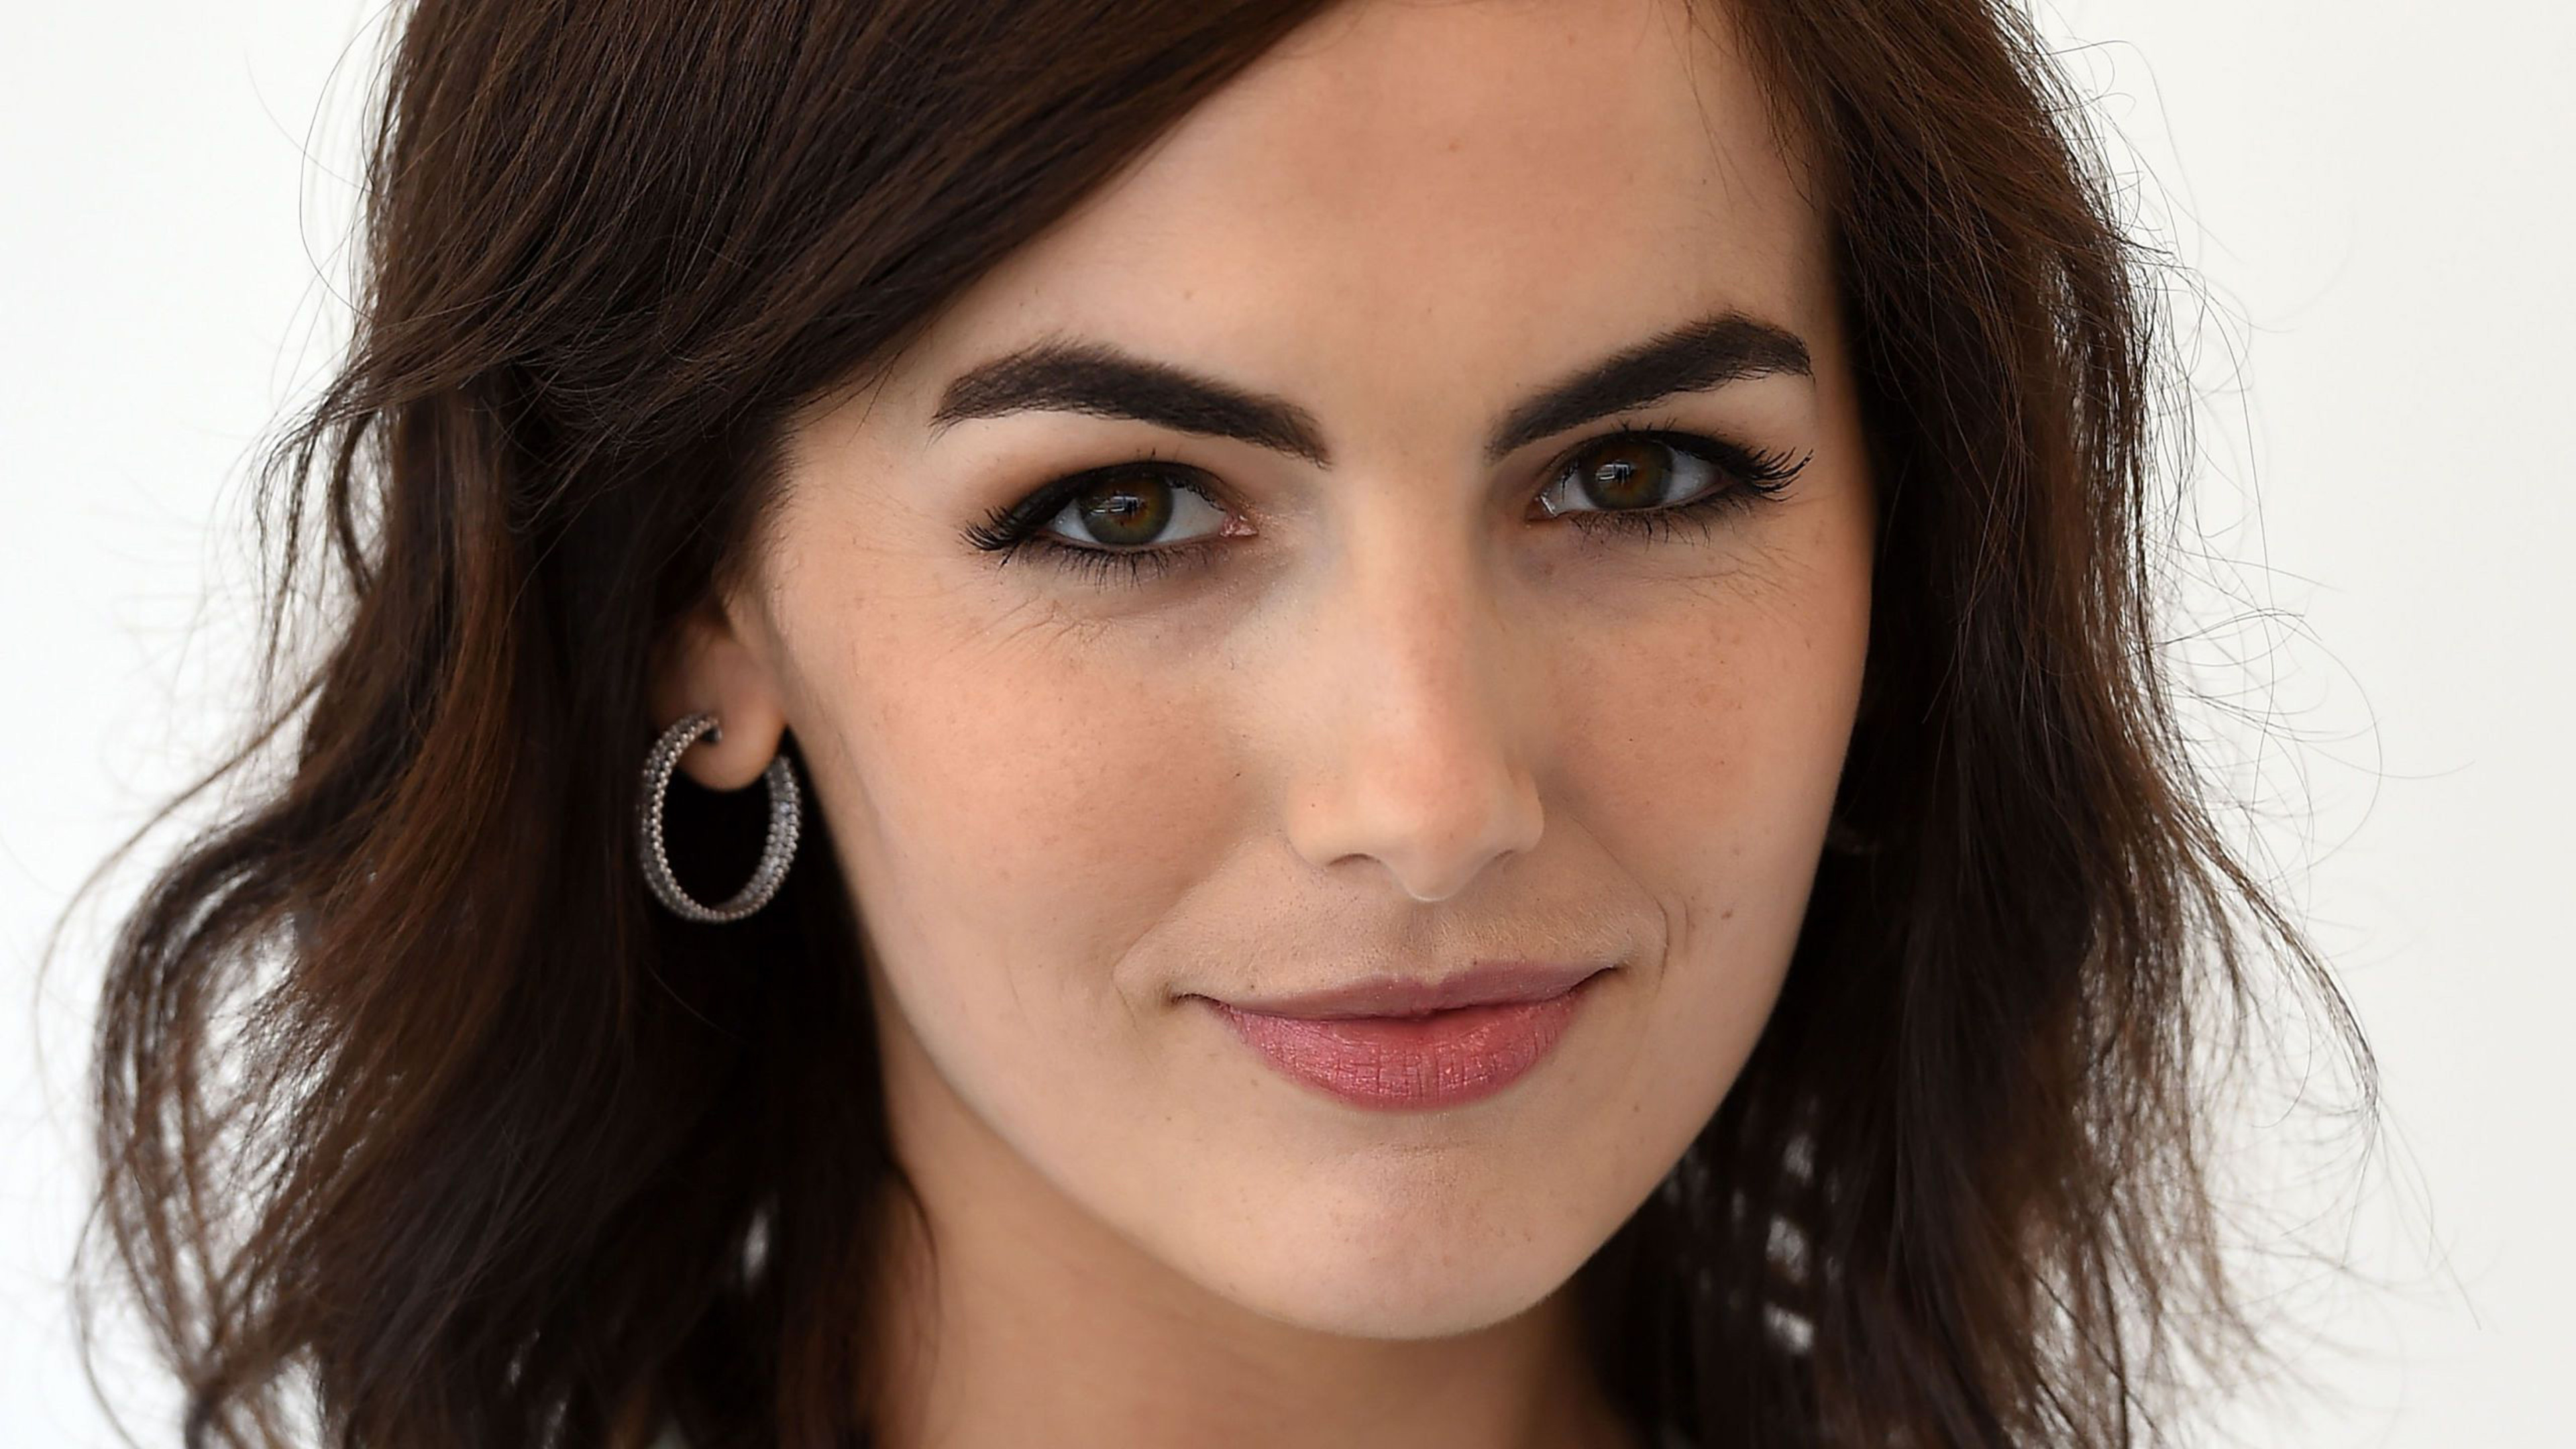 3840x2160 Camilla Belle 2018 4k HD 4k Wallpapers, Images ...